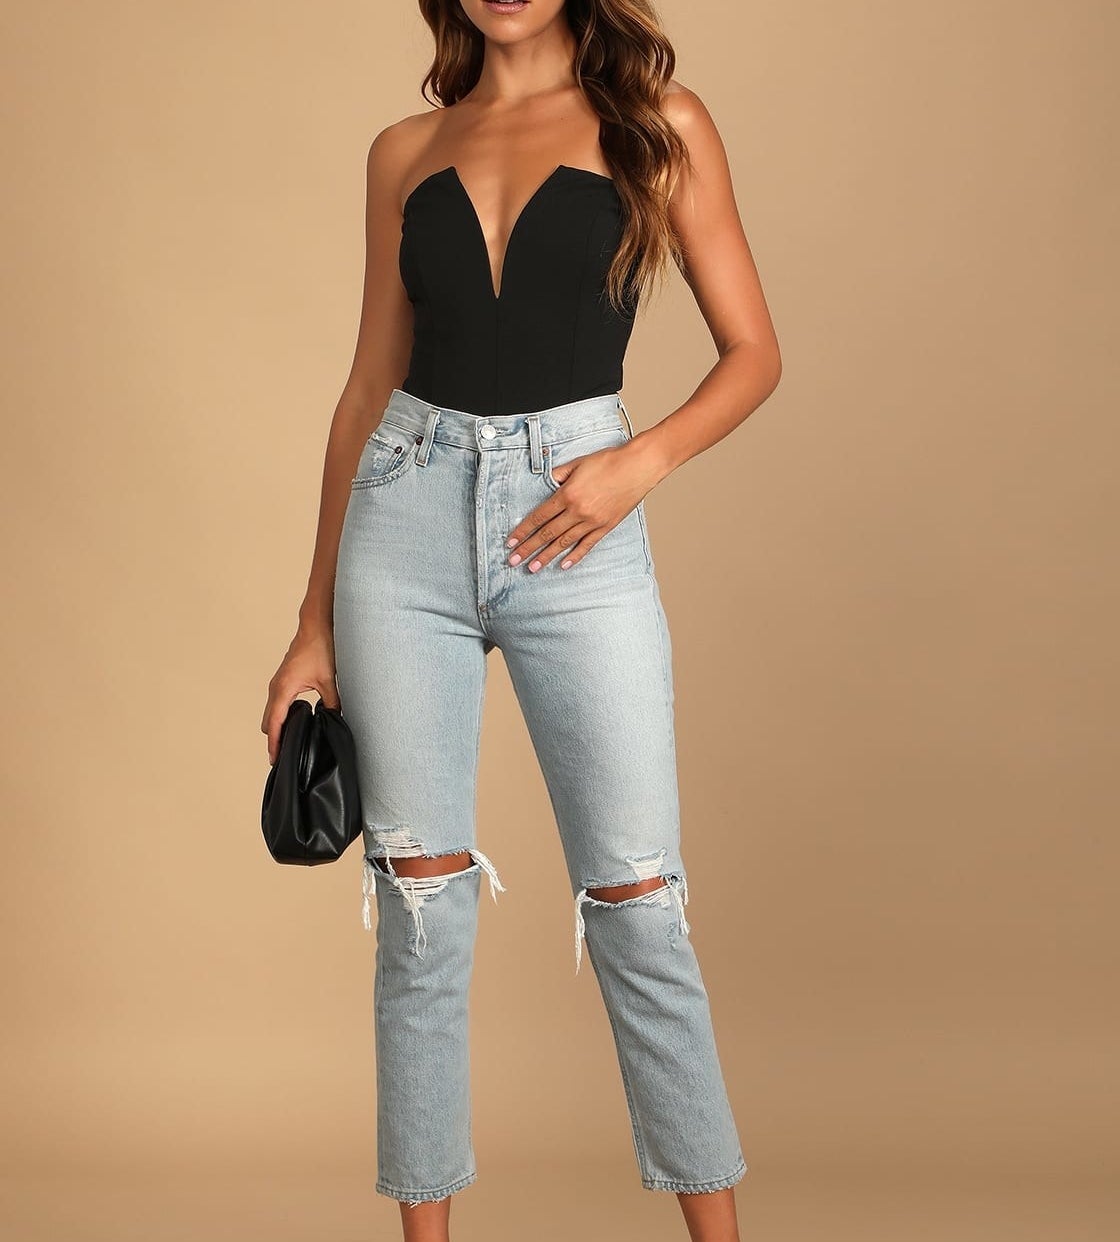 Model is wearing a strapless black bodysuit and denim jeans